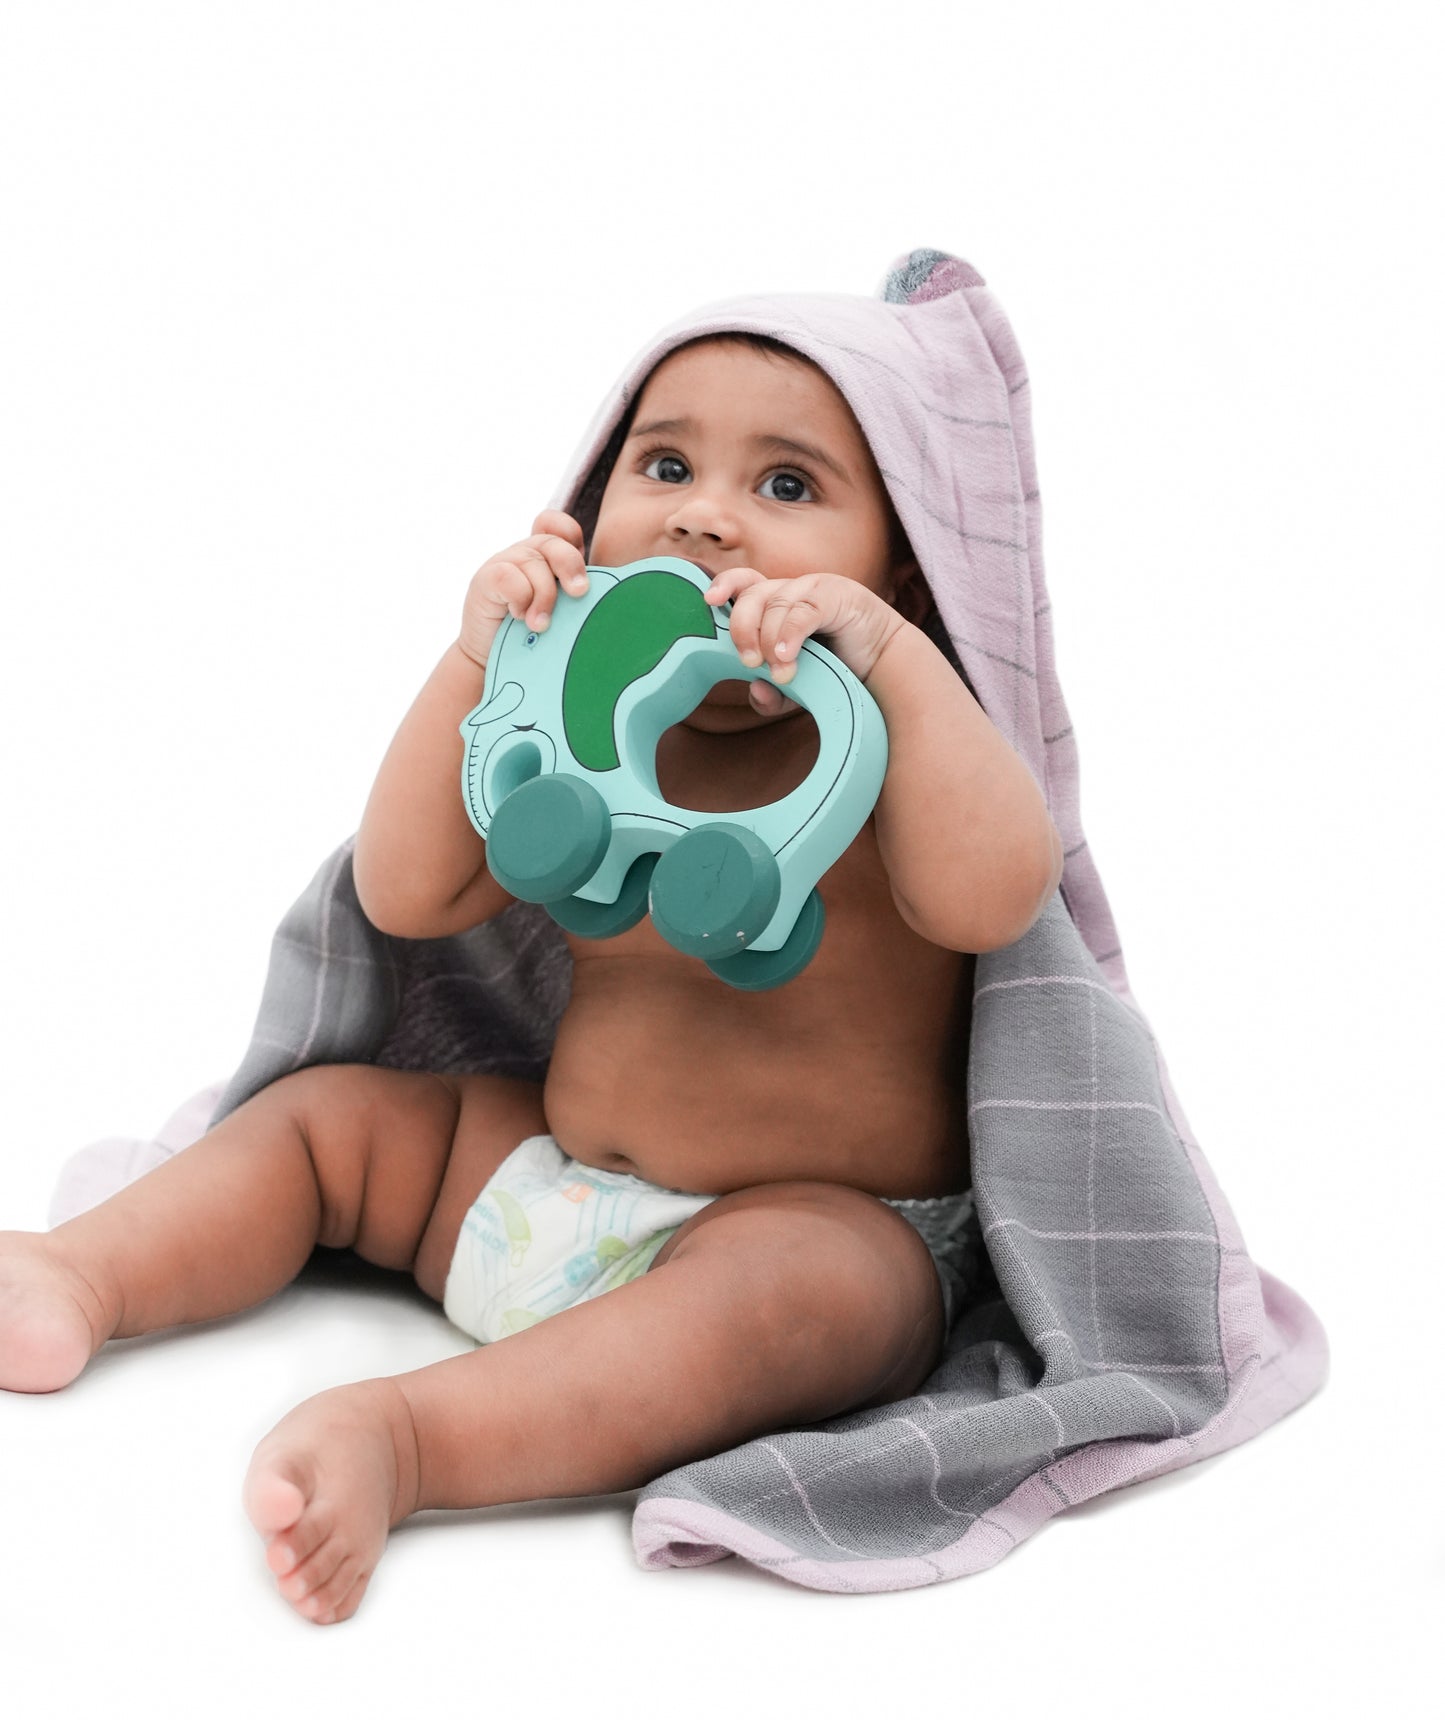 Musa Double Cloth Hooded Baby Towel | 30x30 inches | Get a Freebie